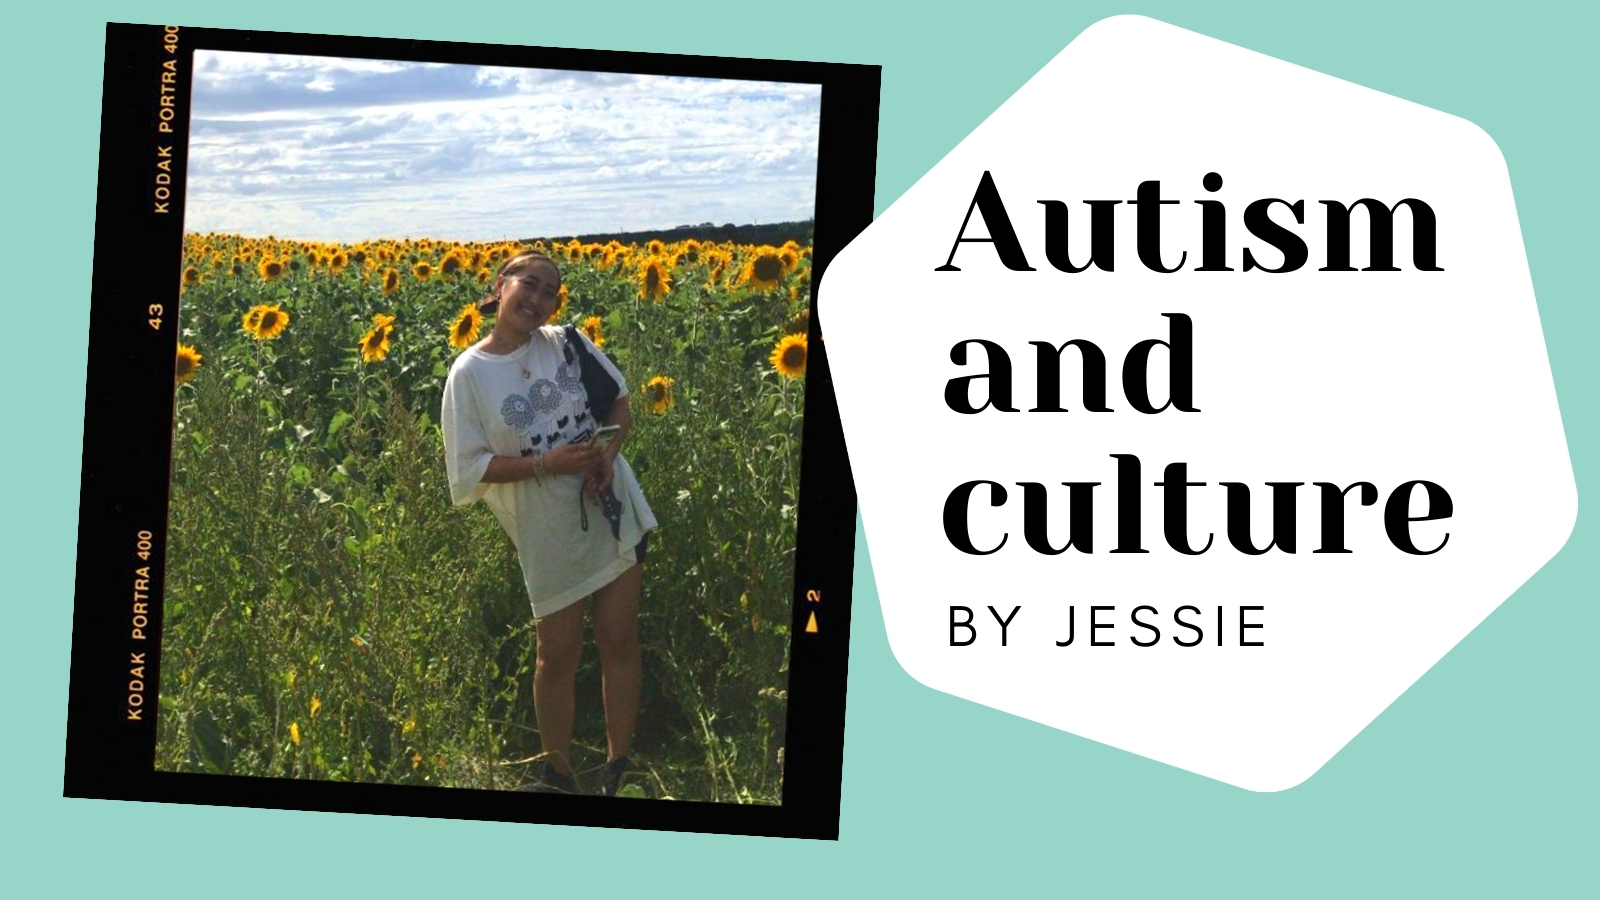 Autism and culture By Jessie. Photo of Jessie standing in a field of sunflowers.